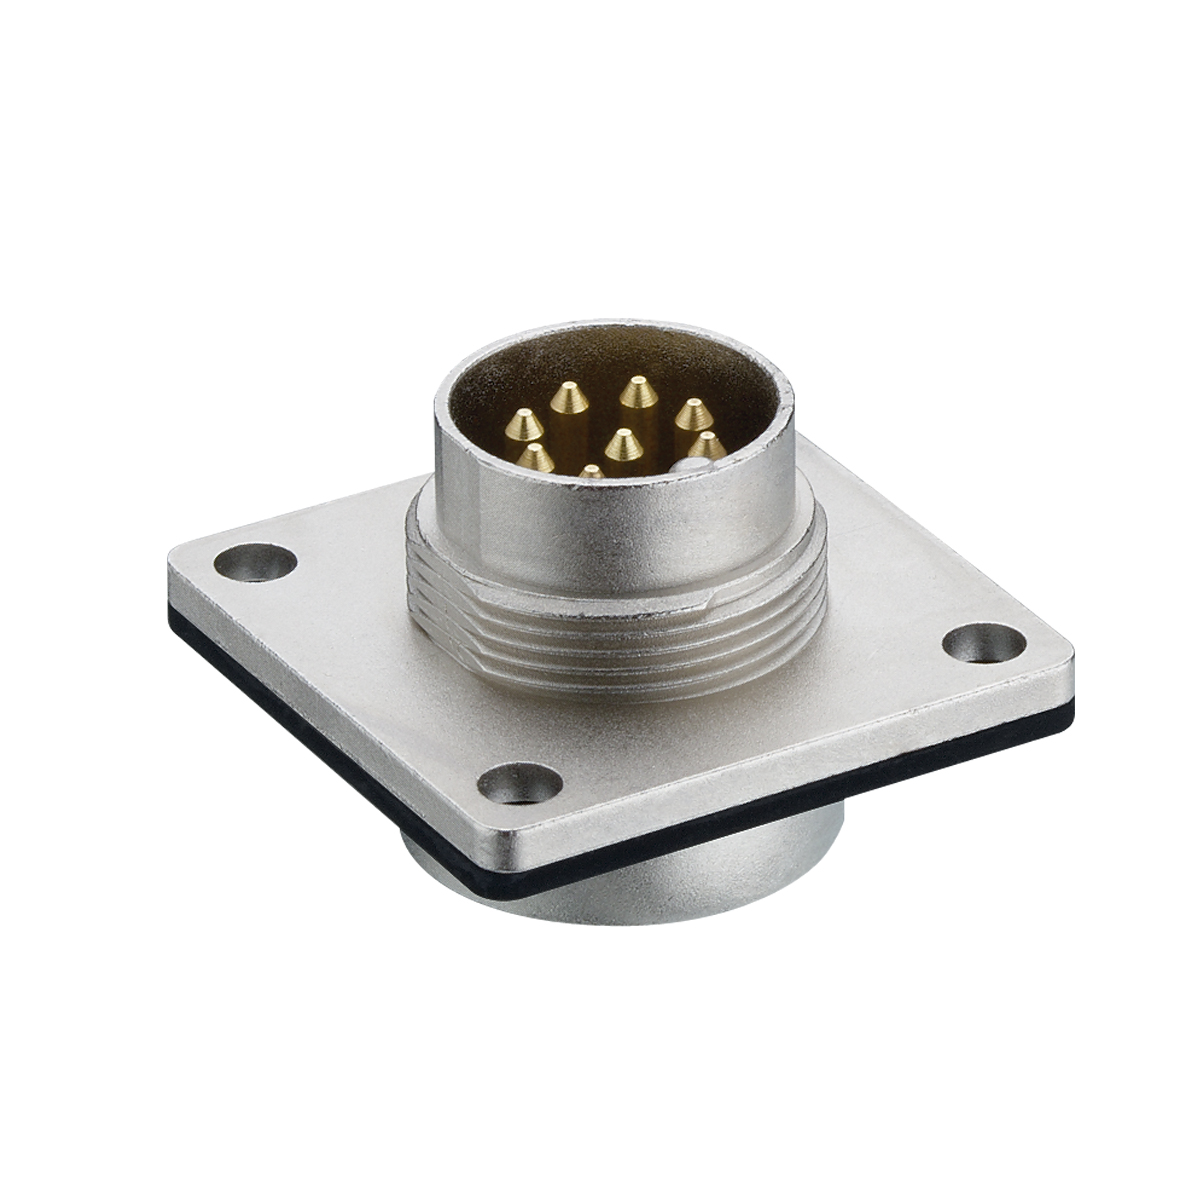 Lumberg: 0318-2 (Series 03 | Circular connectors with threaded joint M16 acc. to IEC 61076-2-106, IP40/IP68)